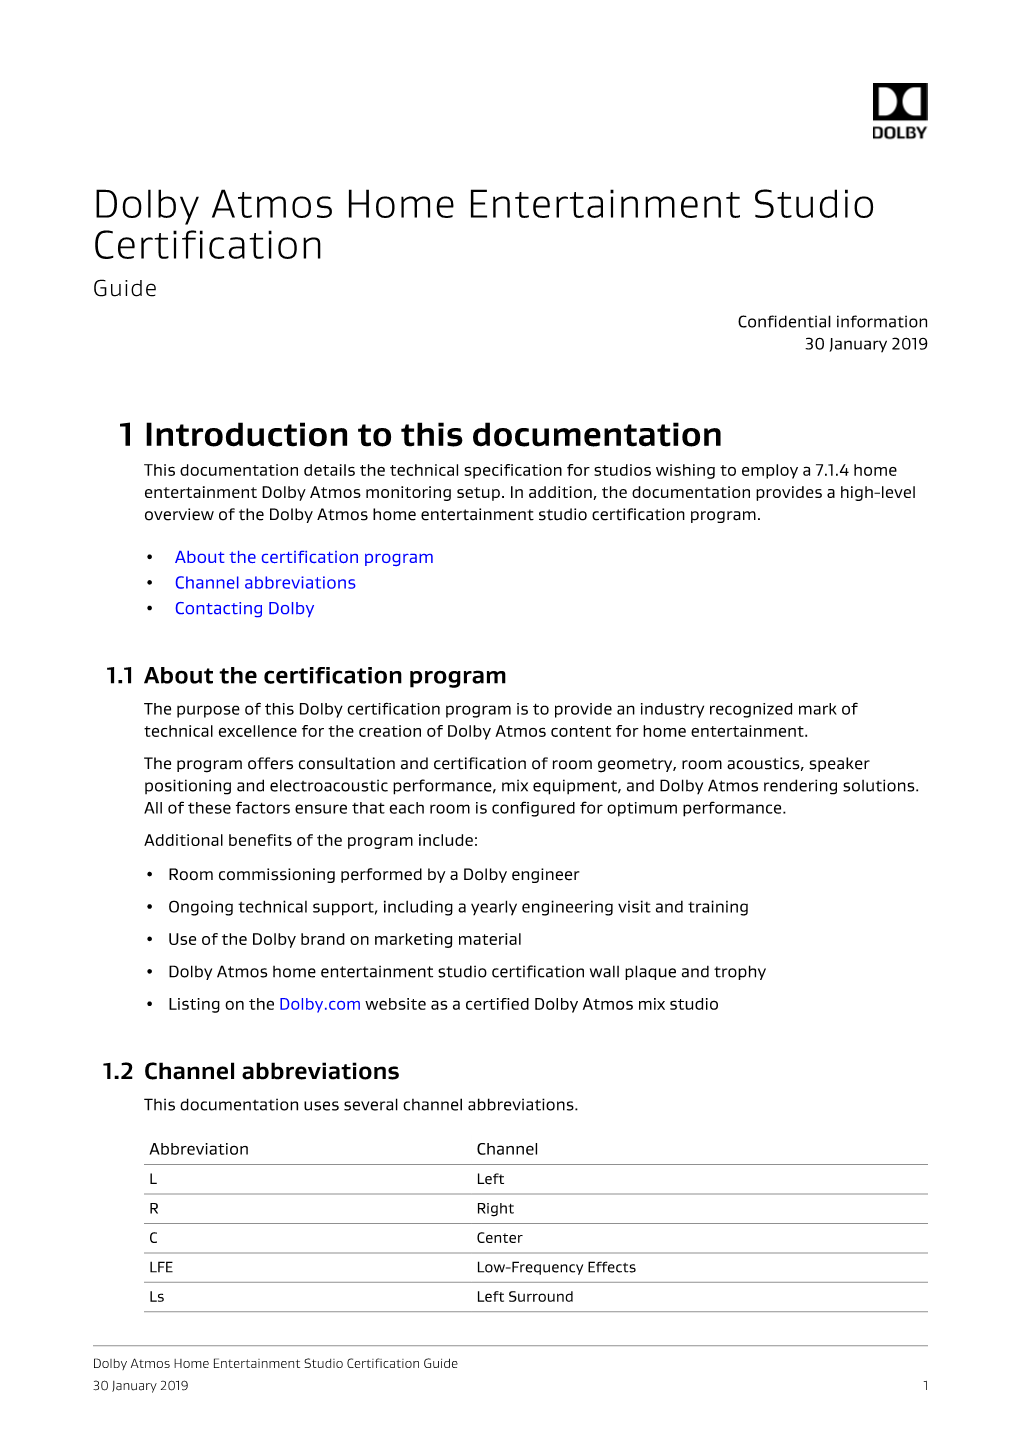 Dolby Atmos Home Entertainment Studio Certification Guide Confidential Information 30 January 2019